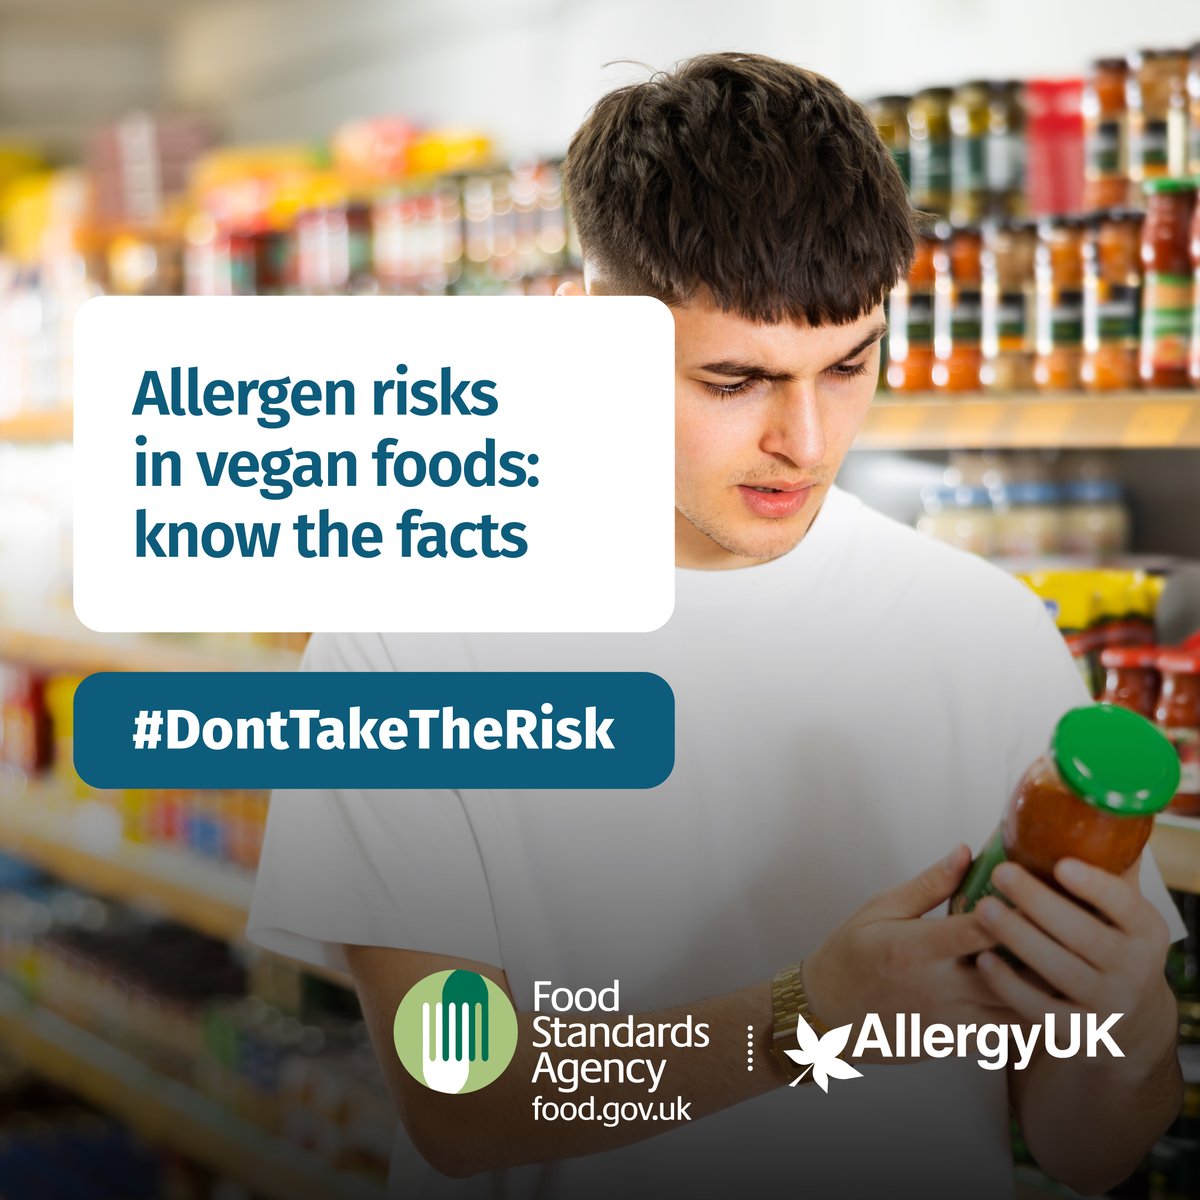 AllergyUK is collaborating with @foodgov campaign to highlight the risk of food labelled as vegan to families managing food allergies. If you have an allergy to animal-based products, always check the may contain label on vegan products to decide if it's safe.  
#Donttaketherisk